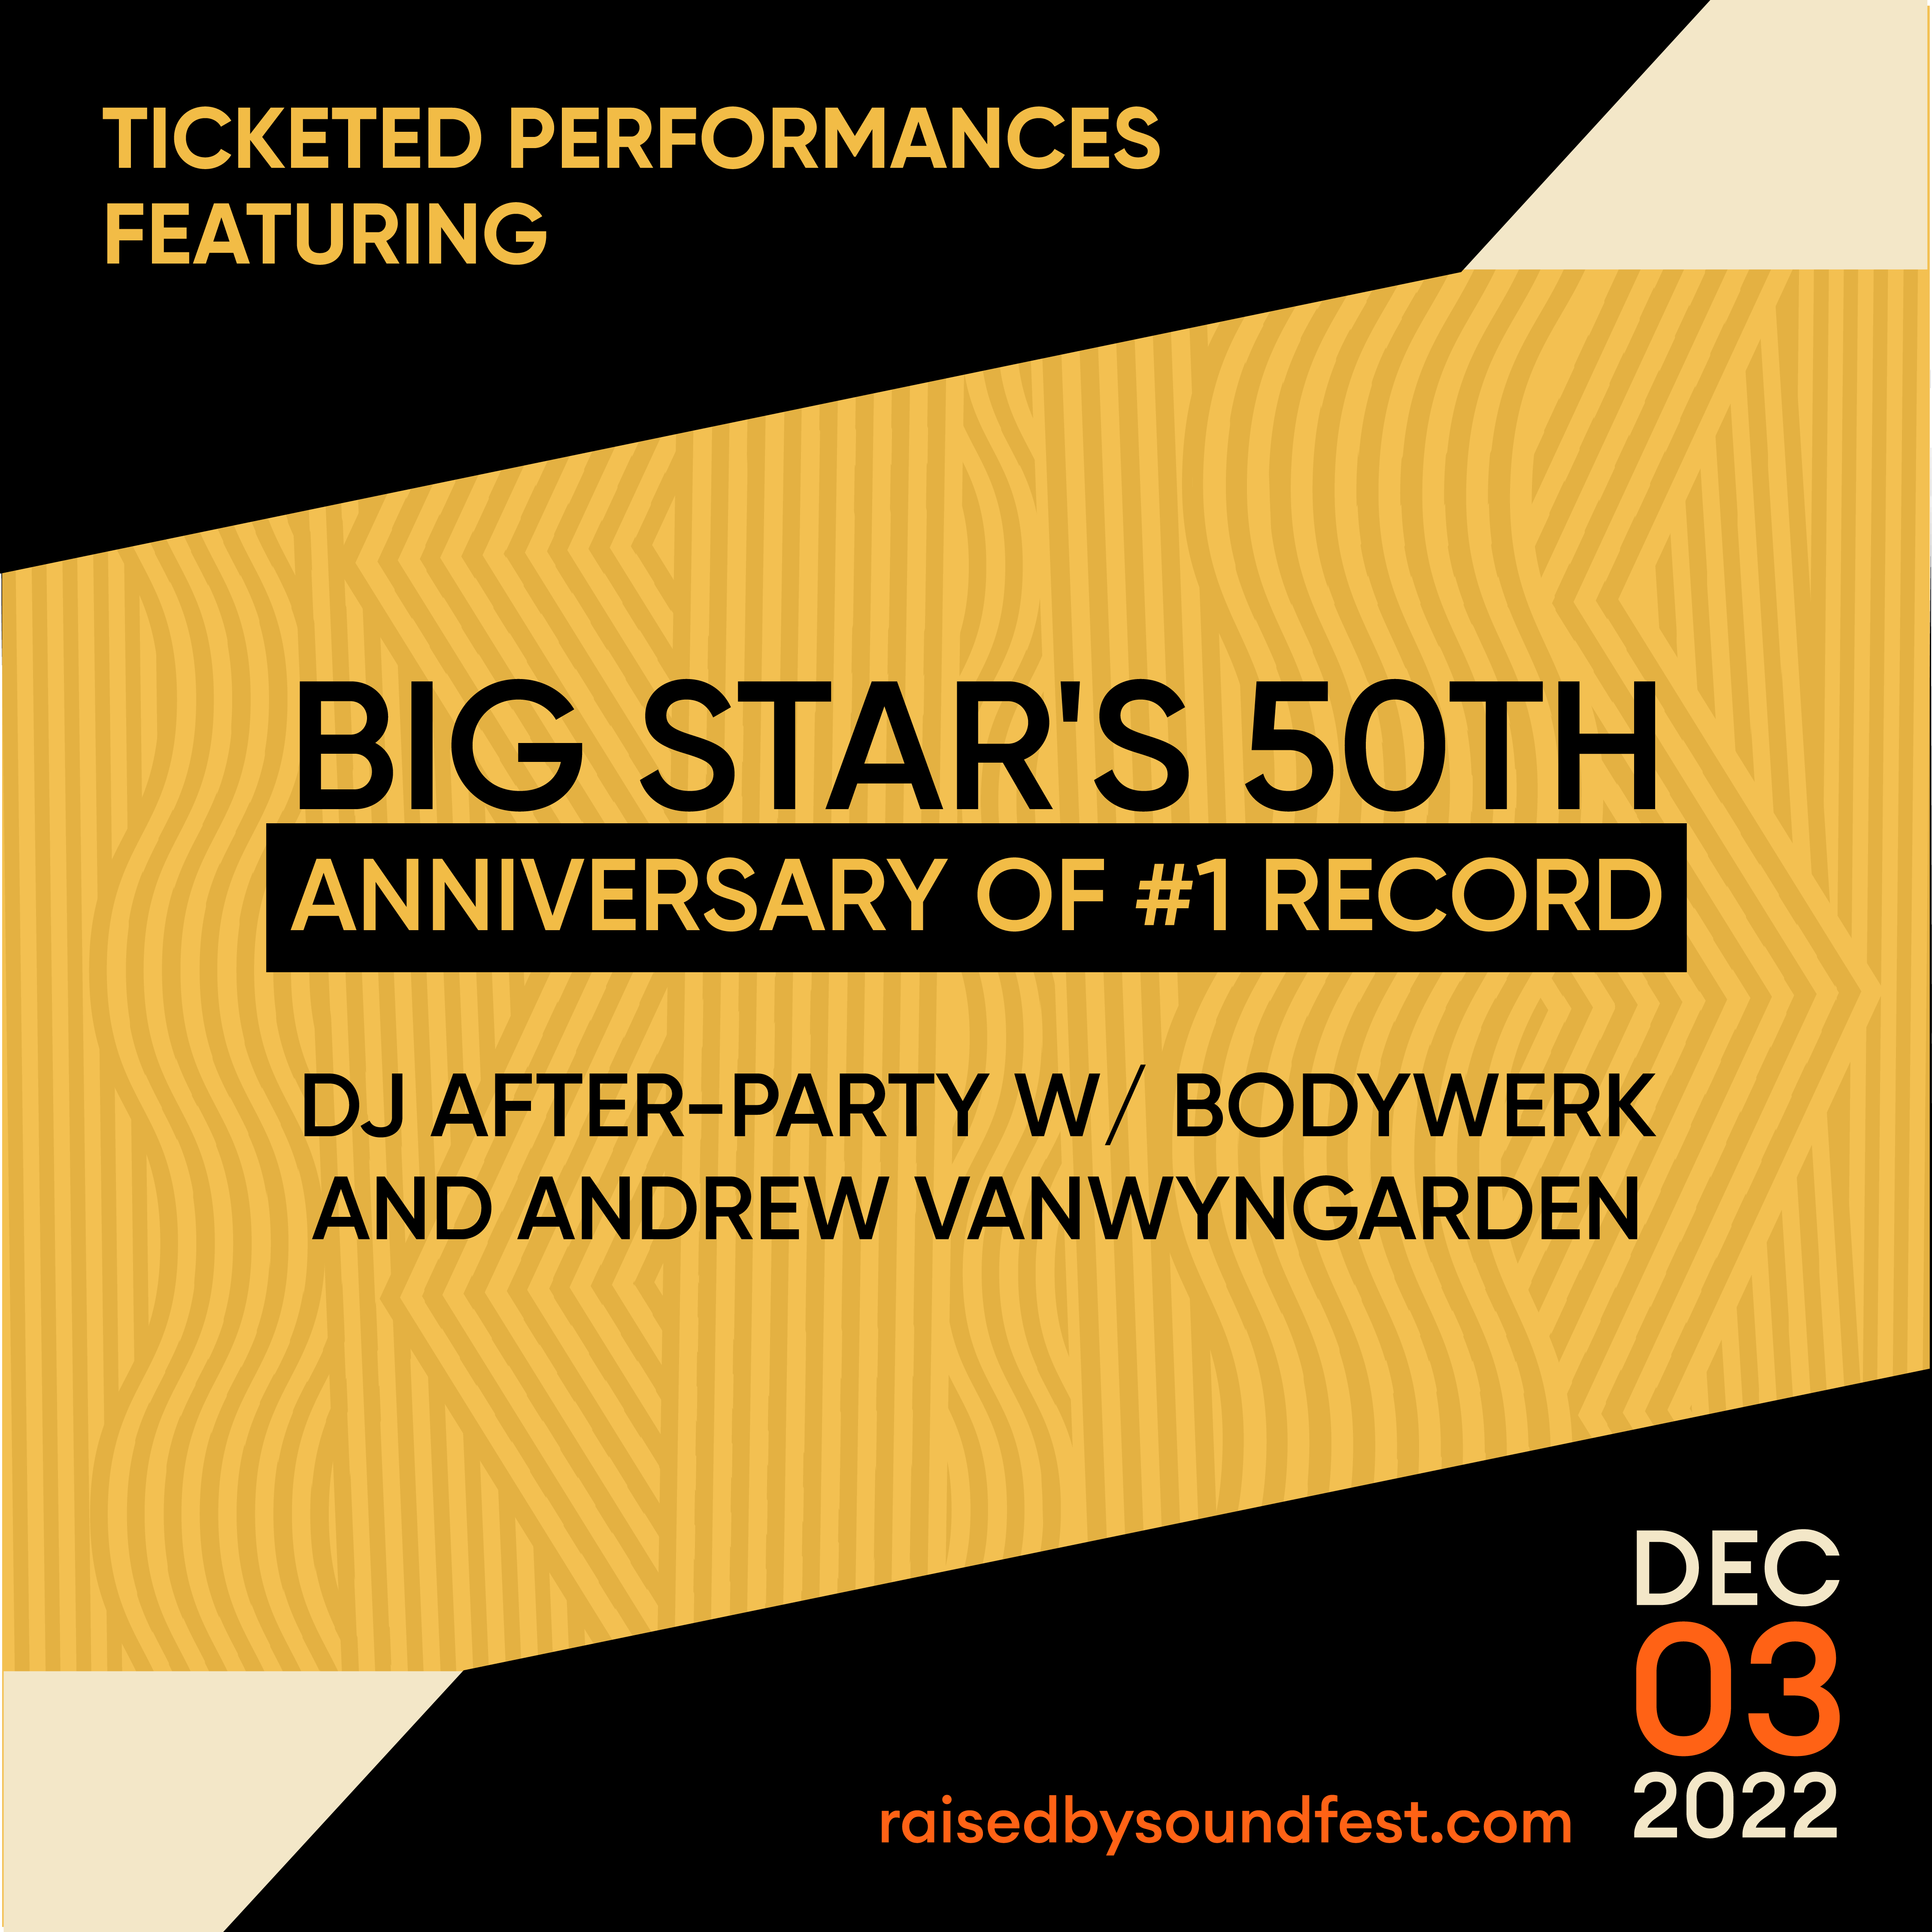 A poster celebrating WYXR's big stars 50th anniversary of record.